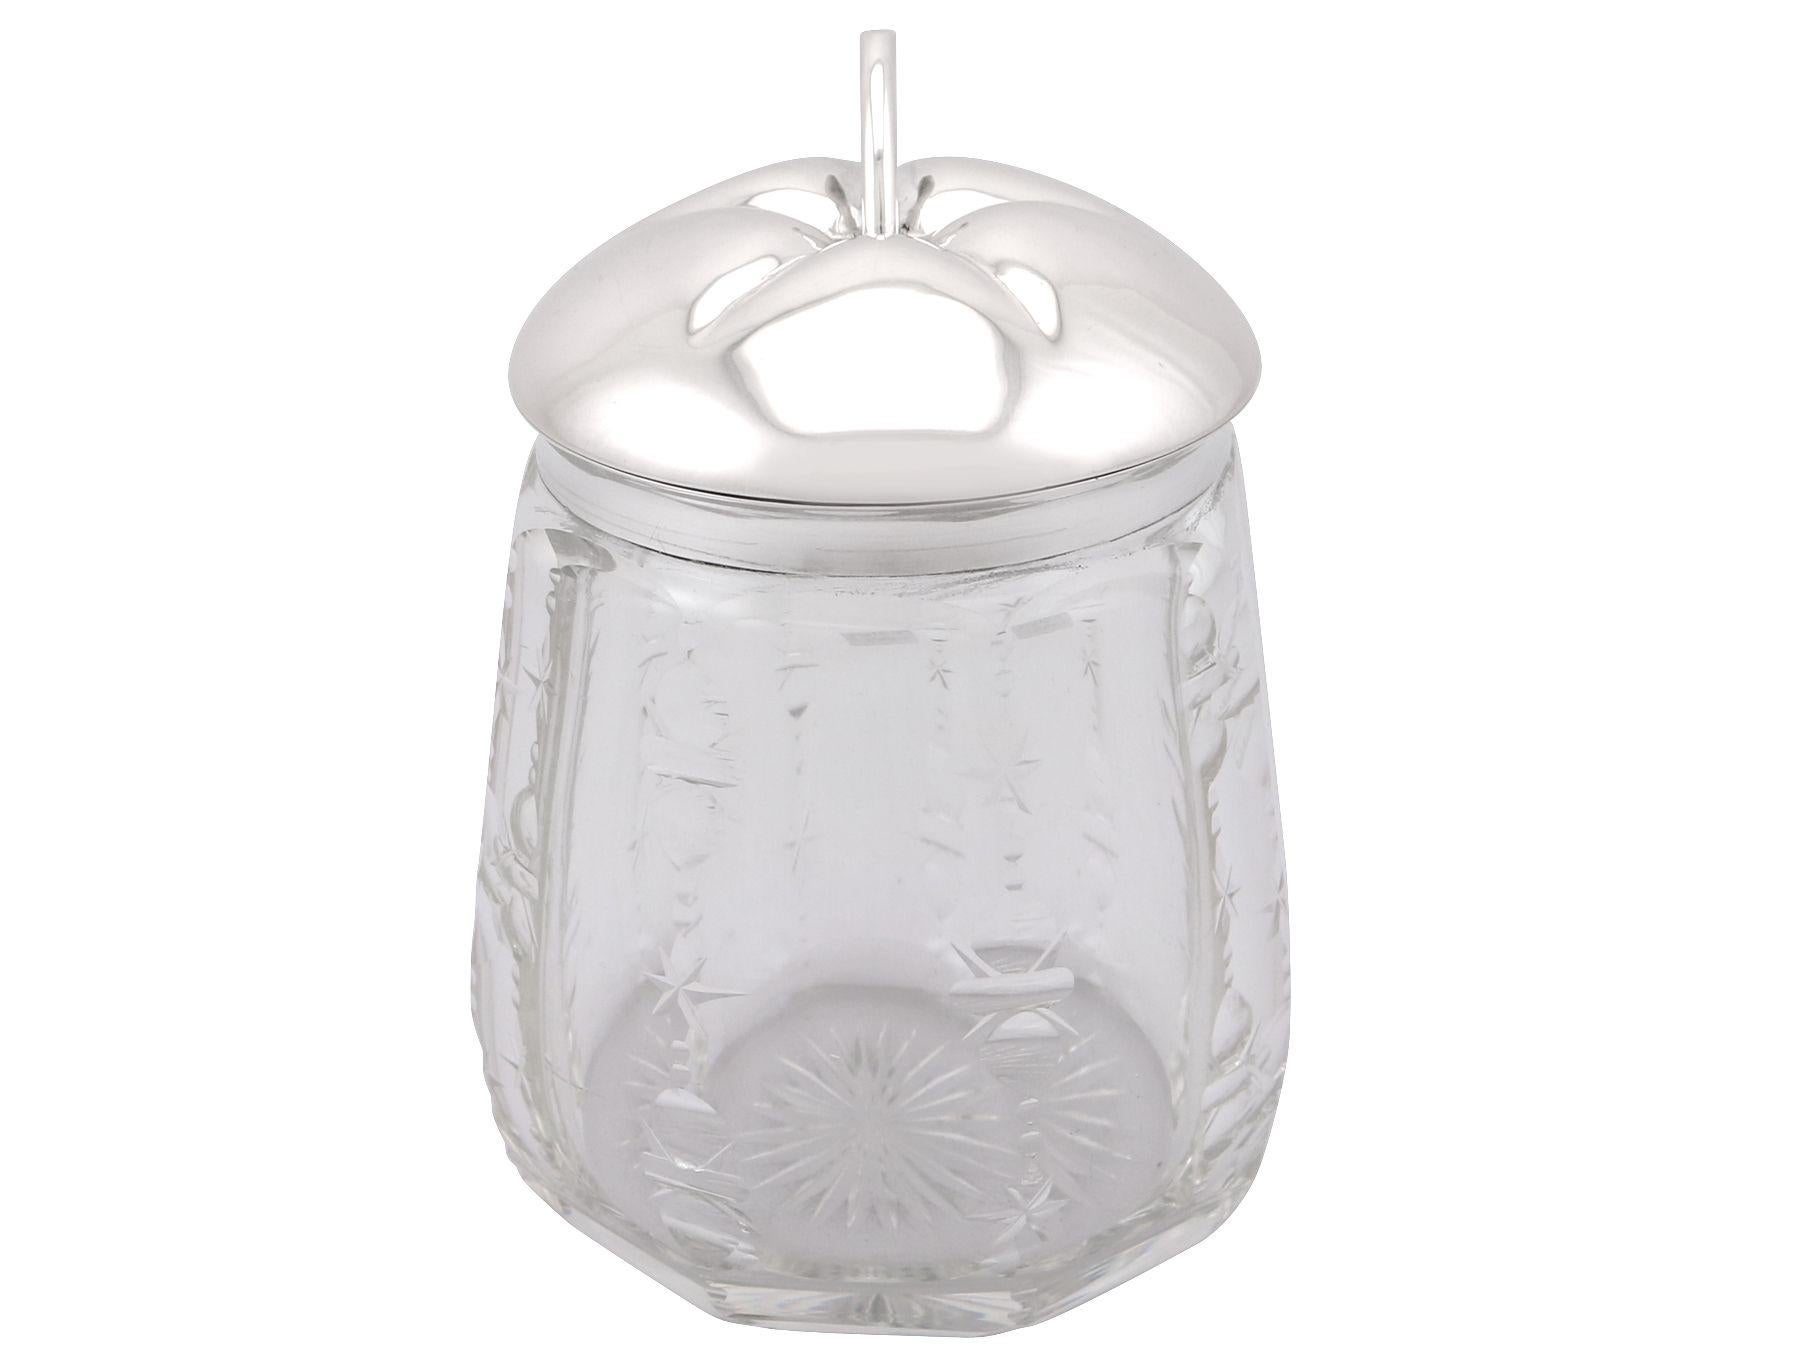 An exceptional, fine and impressive antique German silver and glass jar; an addition to our diverse range of continental silverware.

This exceptional antique German 800 standard silver box has a circular shaped form.

The jar is fitted with a